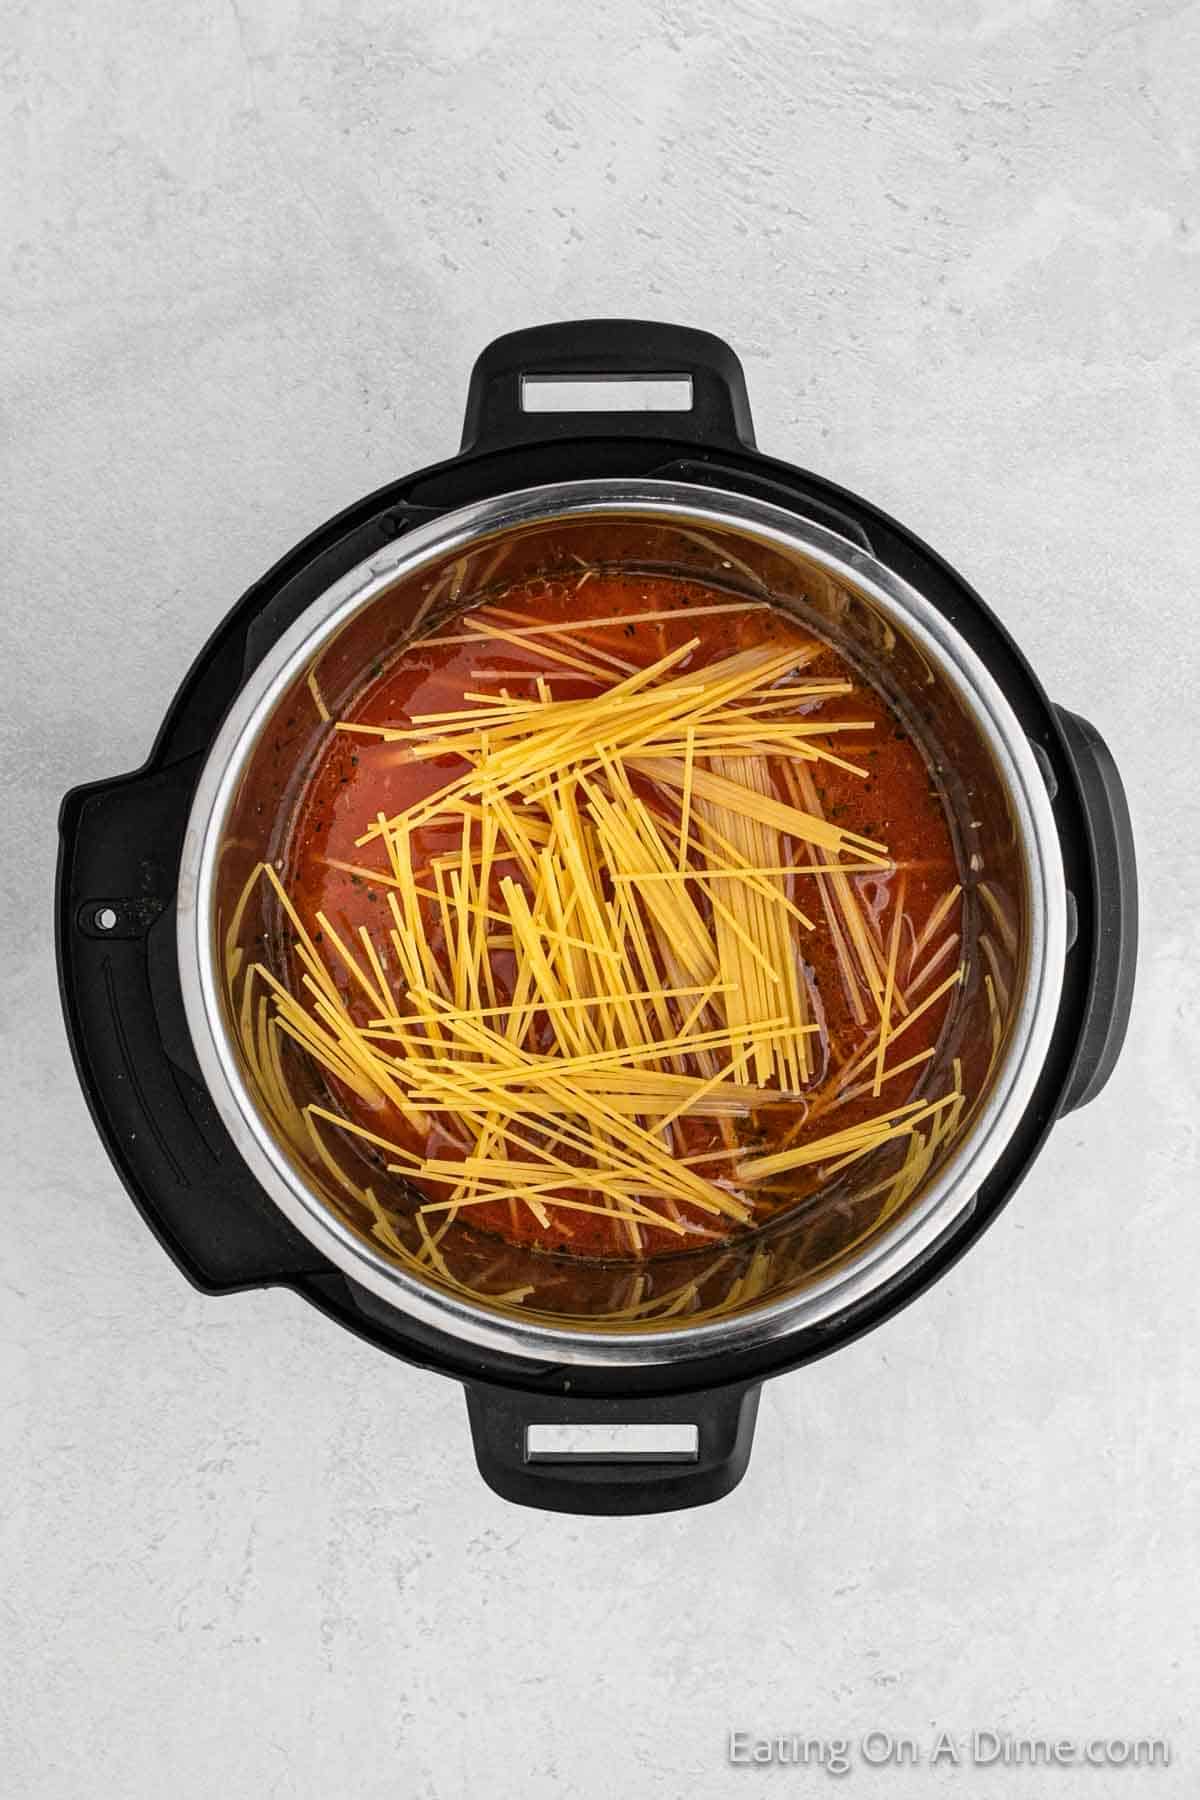 Add in the spaghetti noodles into the instant pot